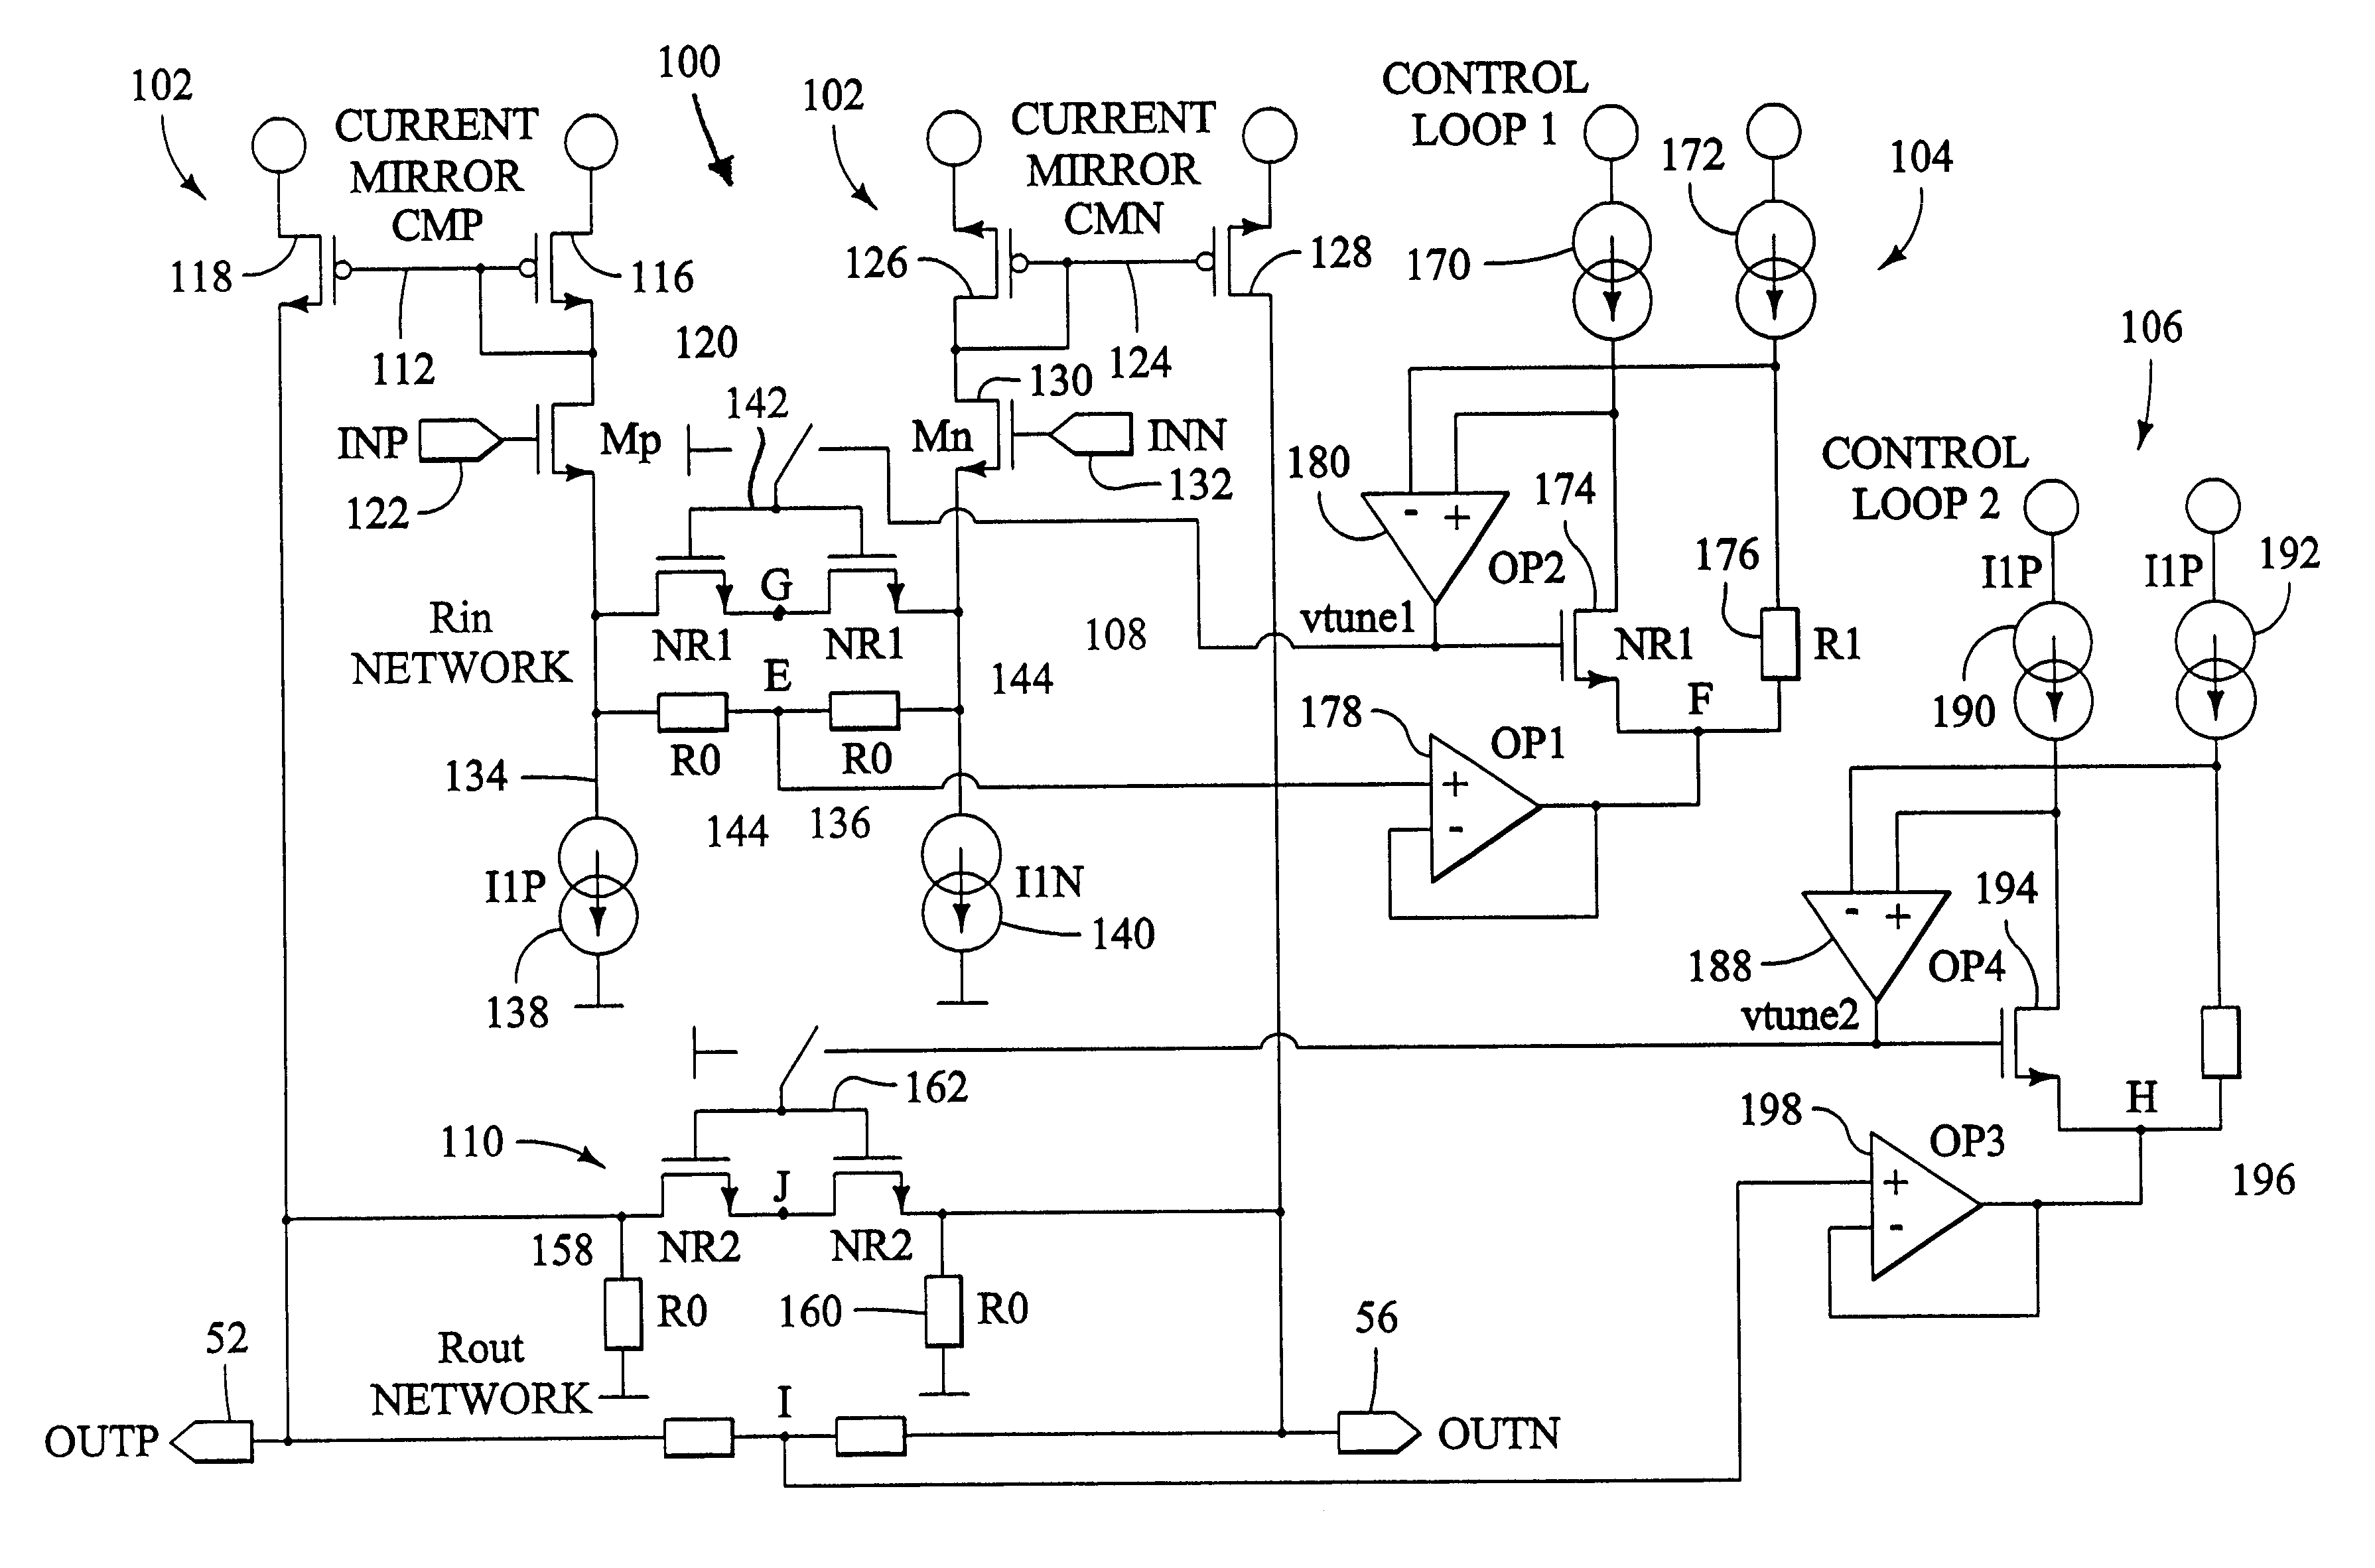 Programmable logarithmic gain adjustment for open-loop amplifiers